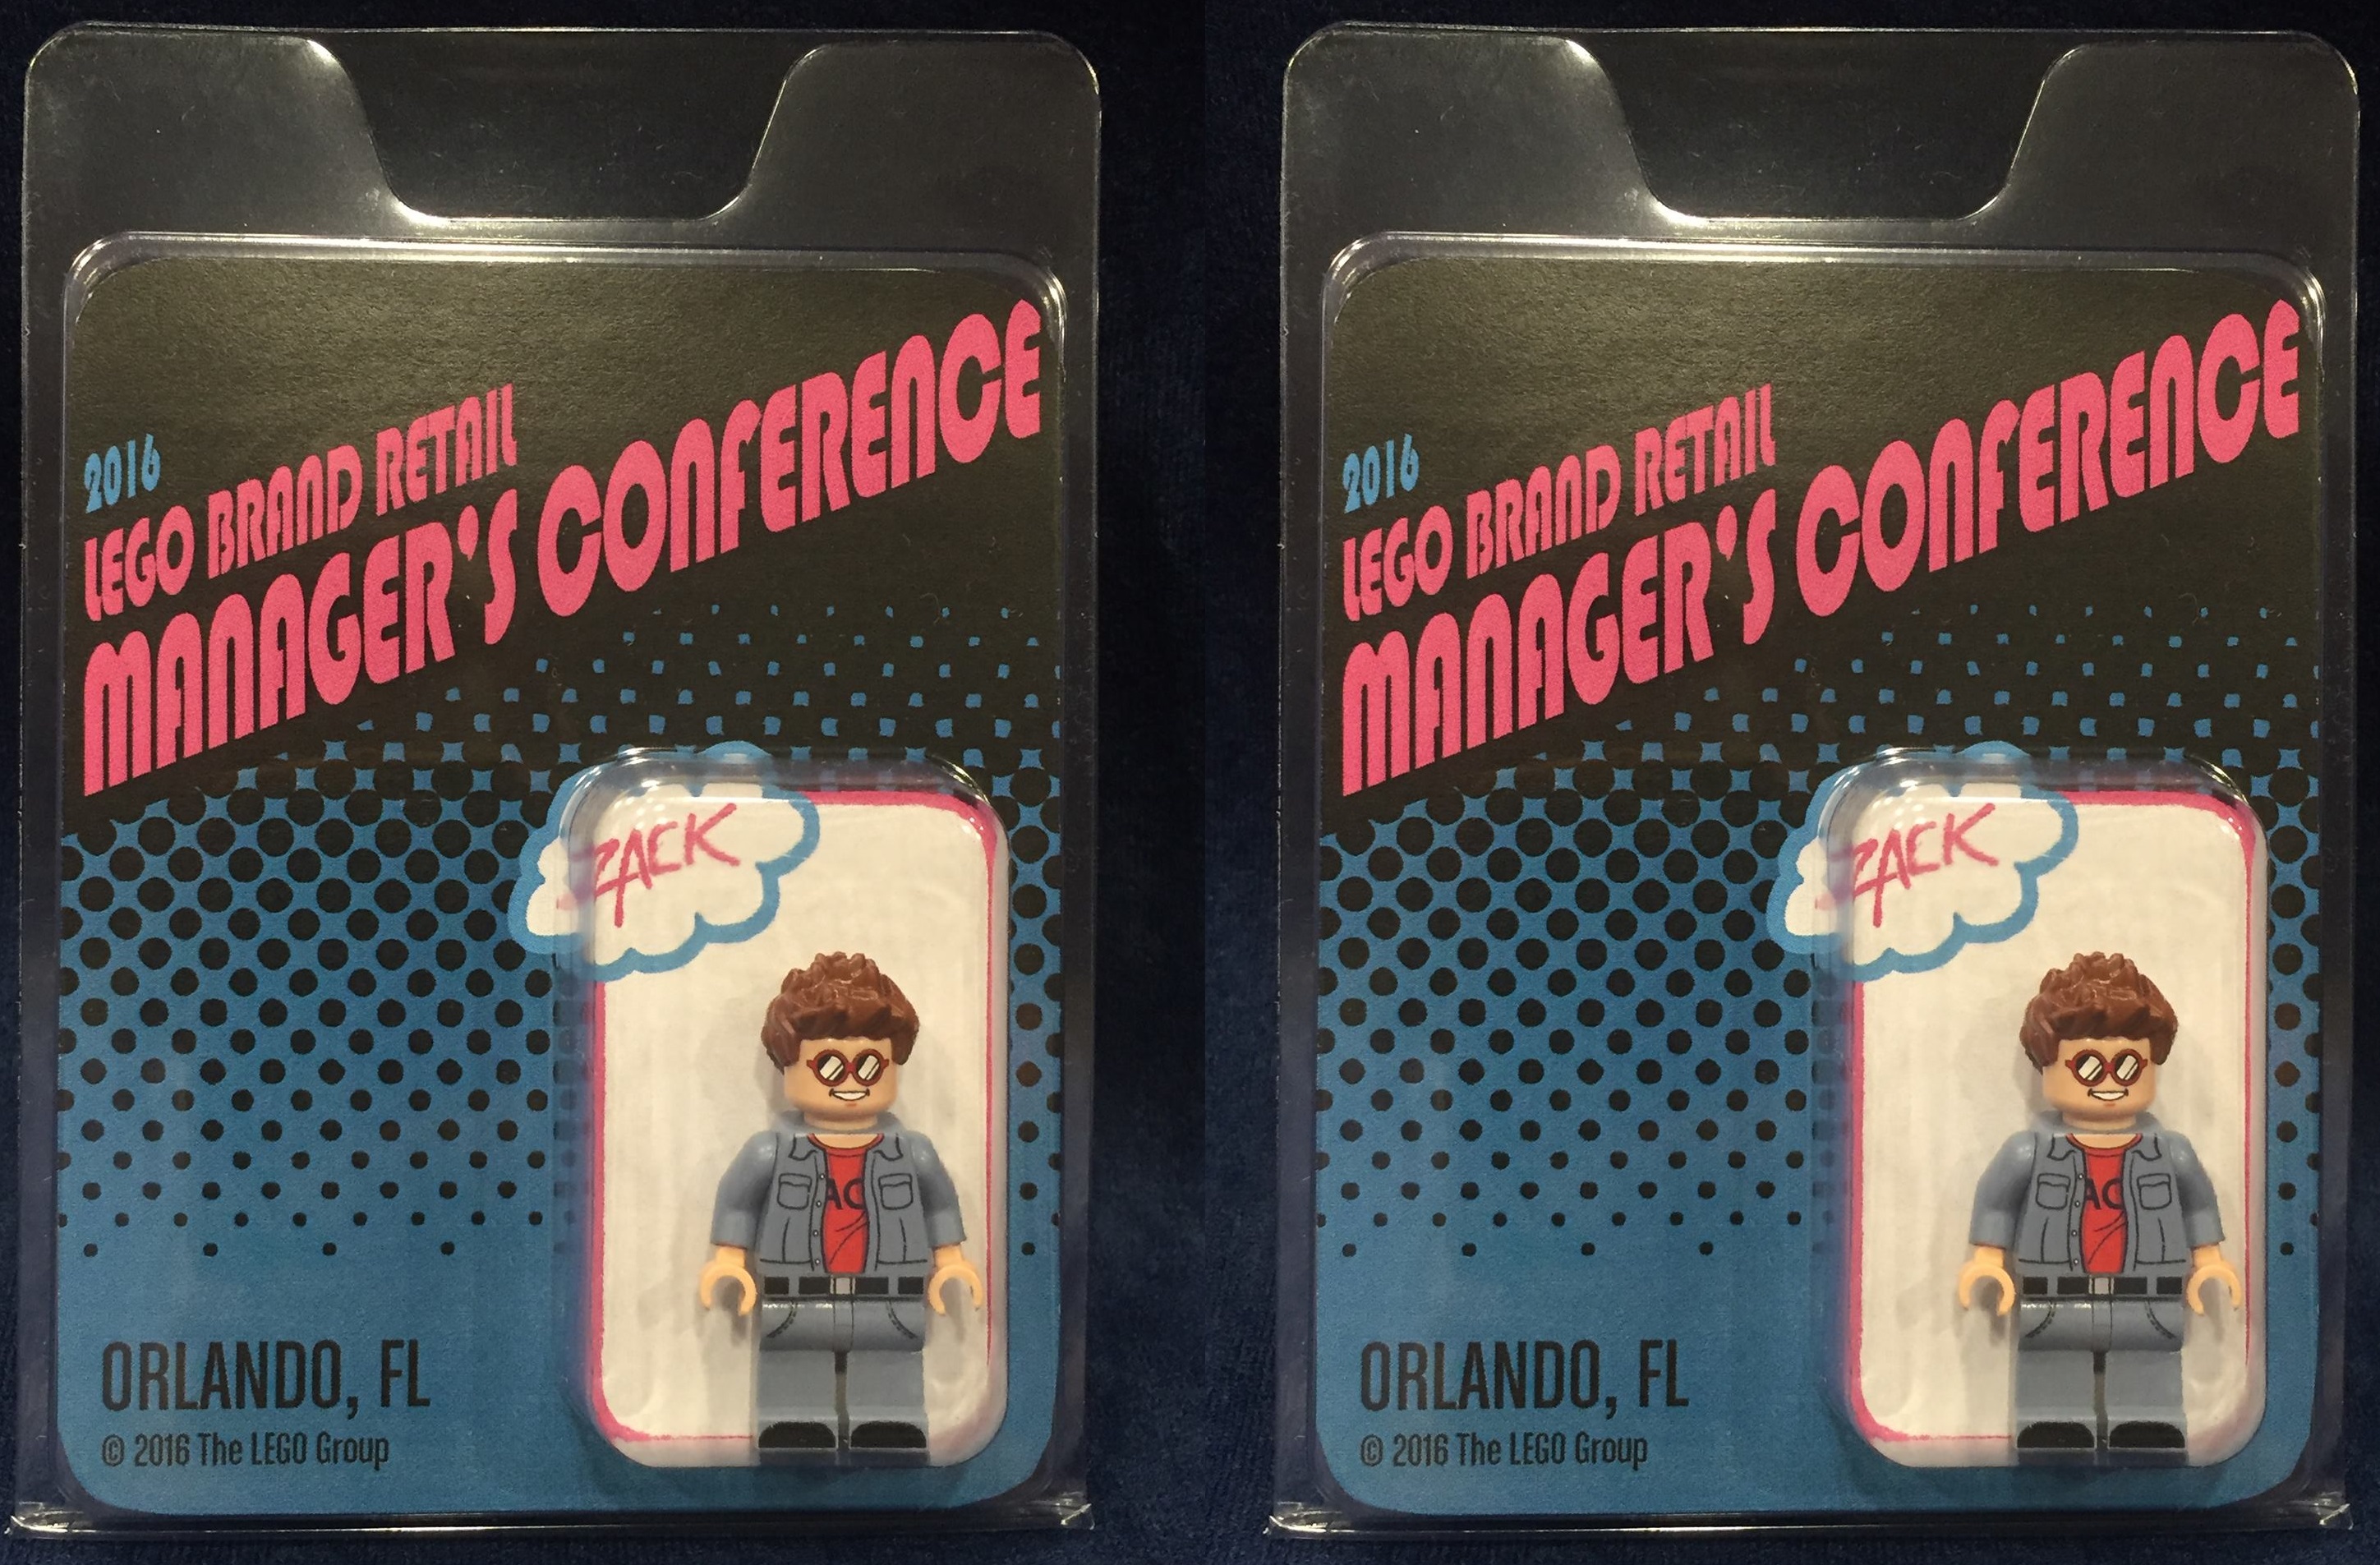 2016-Lego-Retail-Managers-Conference-Orl